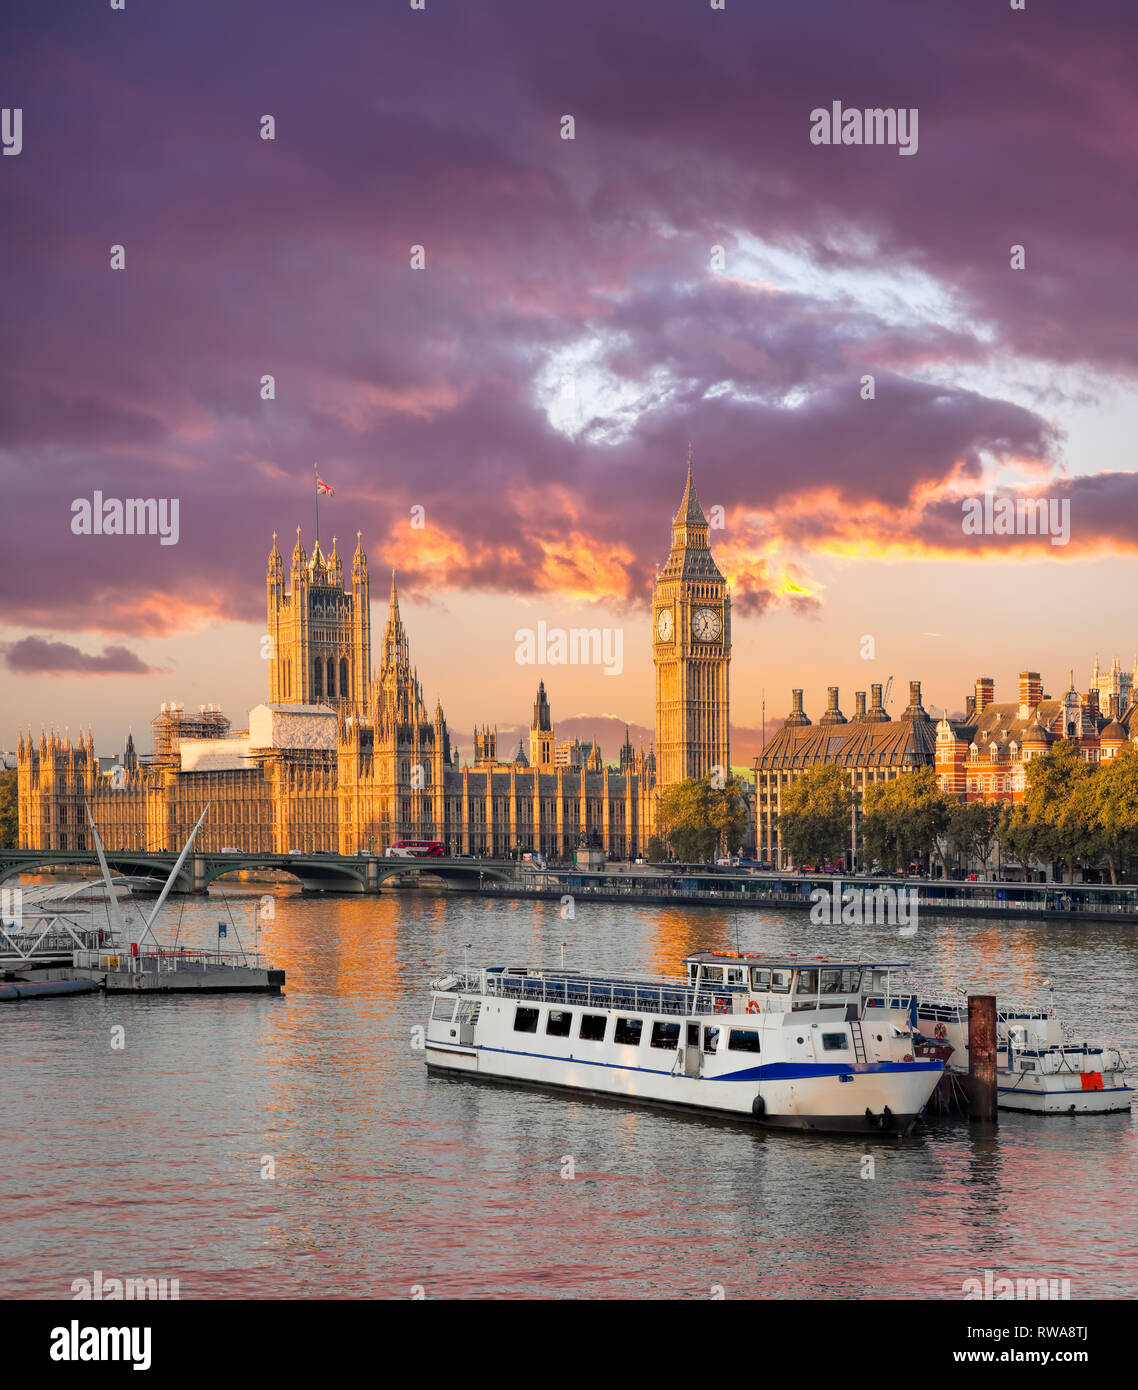 Big Ben and Houses of Parliament with boat in London, England, UK Stock Photo